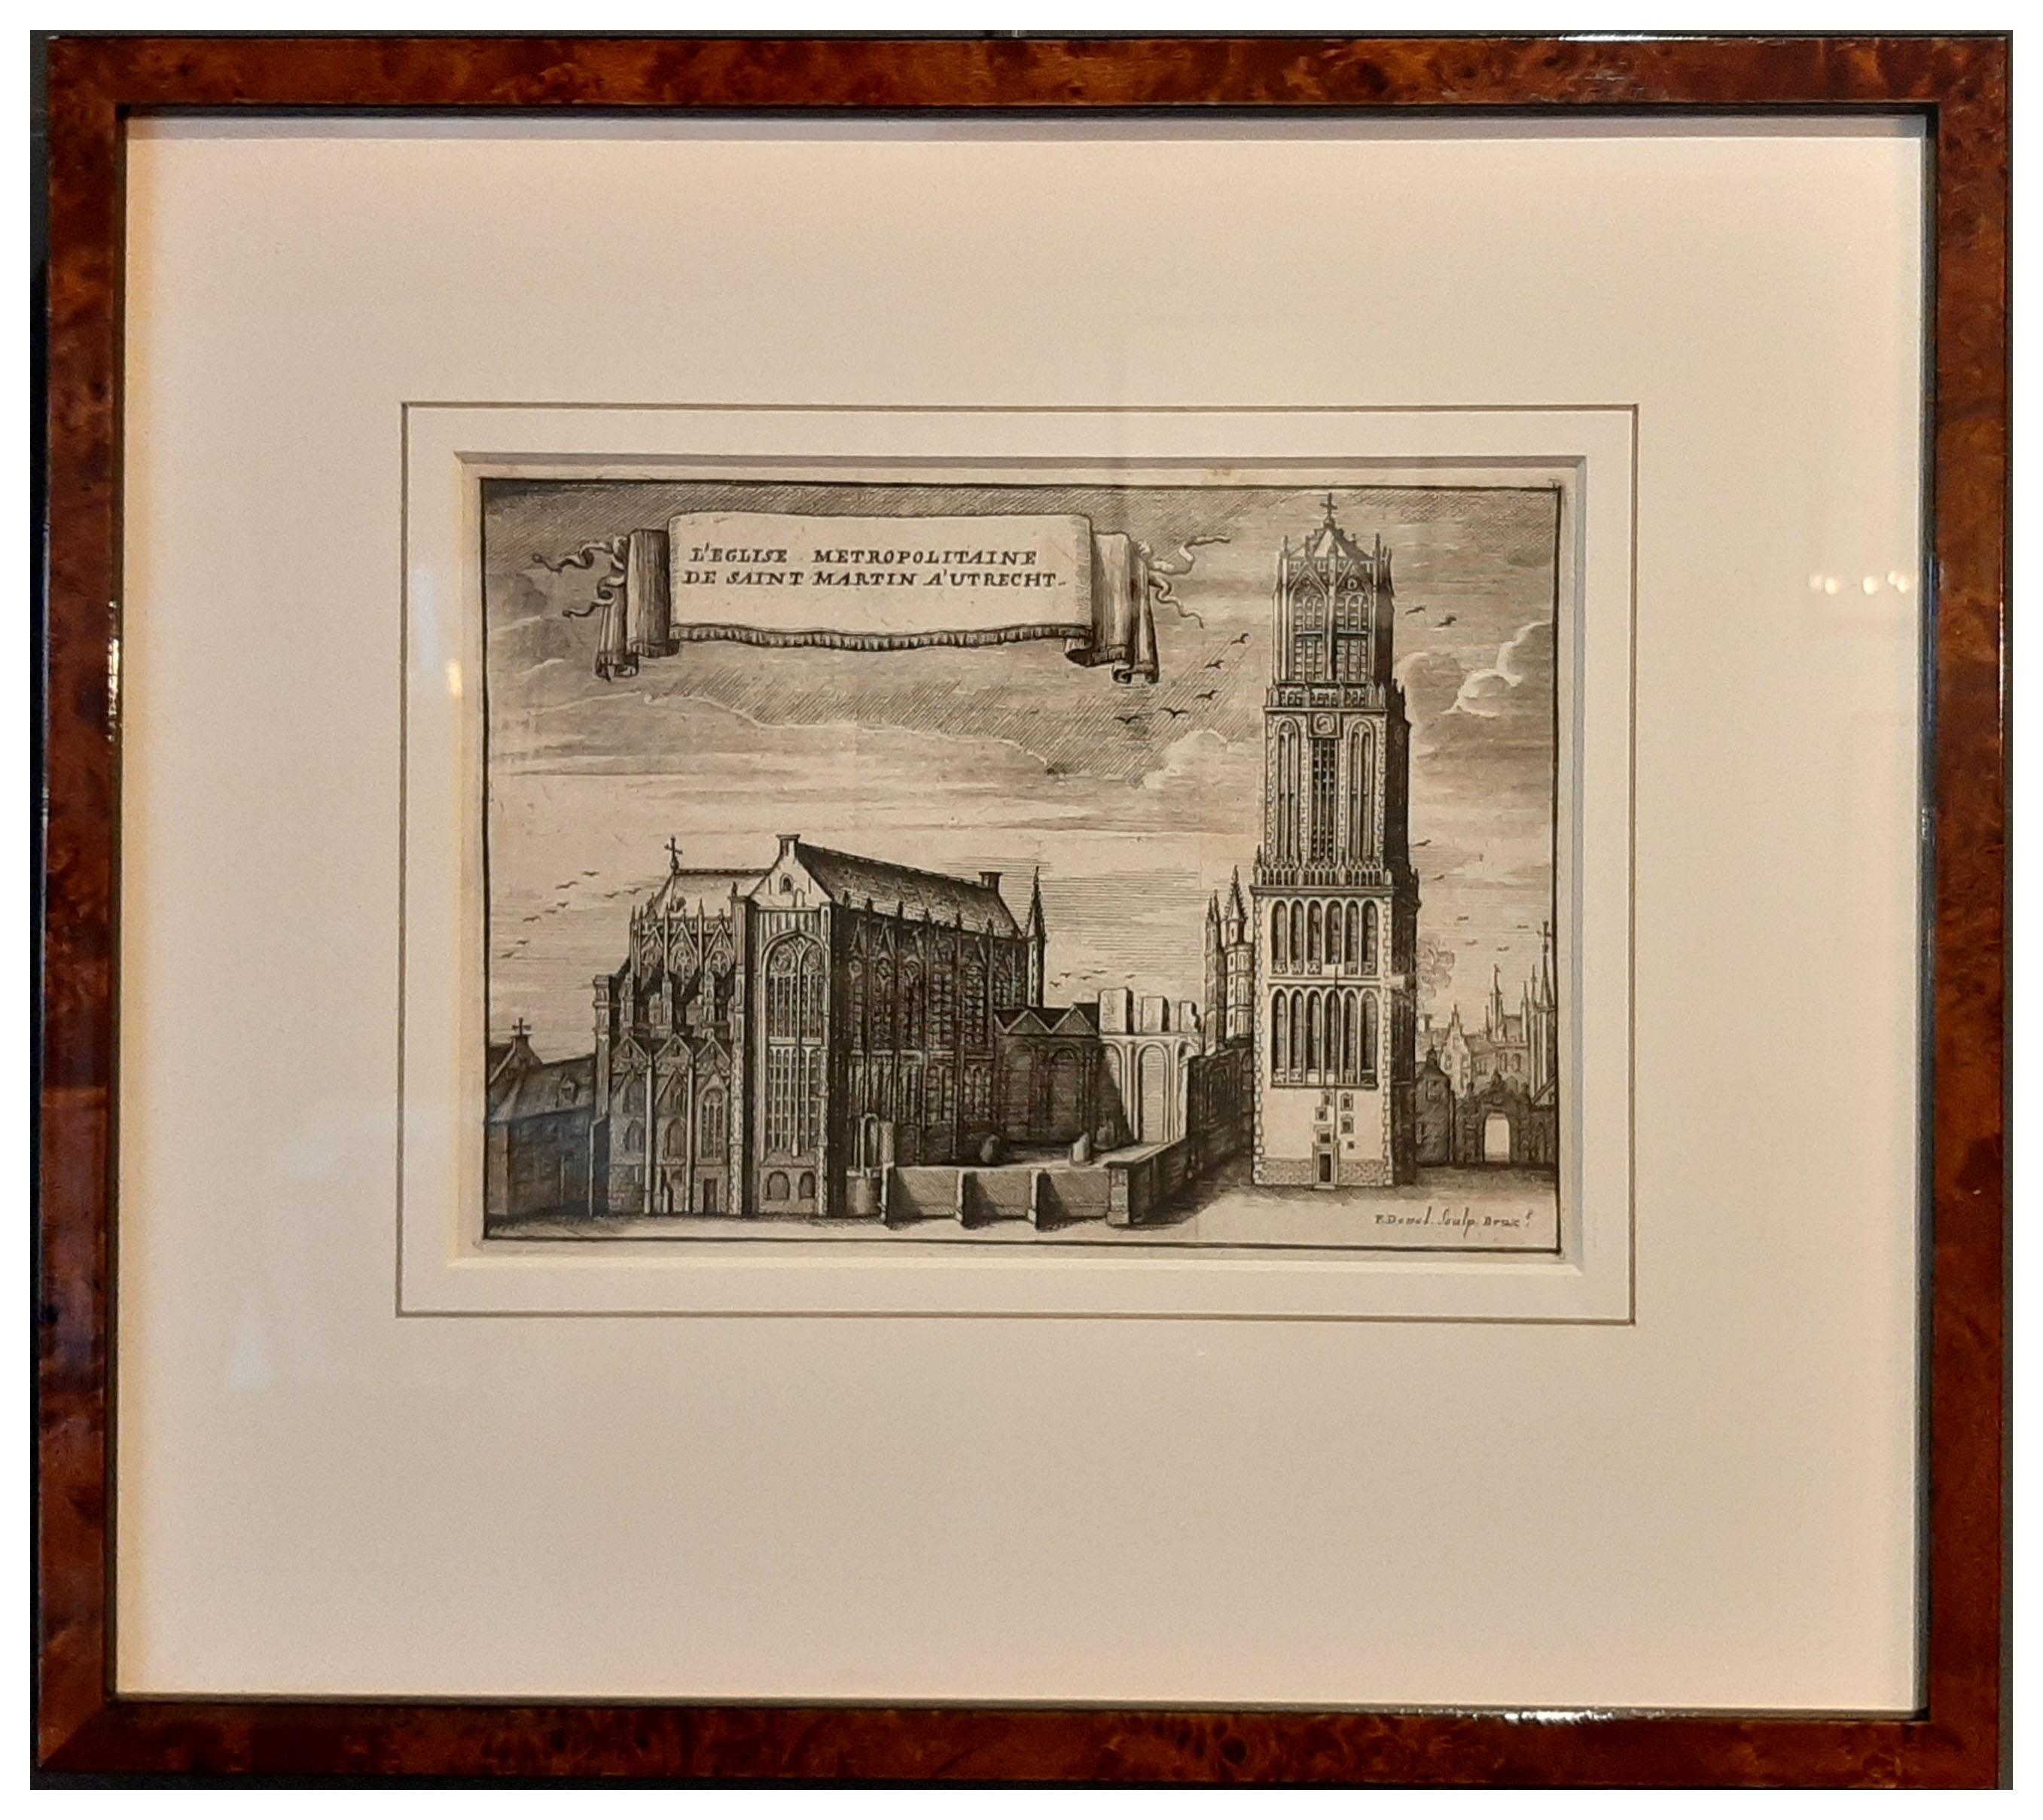 Antique print titled 'L'Eglise Metropolitaine de Saint Martin a' Utrecht'. 

View of St. Martin's Cathedral in Utrecht, also known as 'Domkerk'. 

Artists and Engravers: Published by P. Devel.